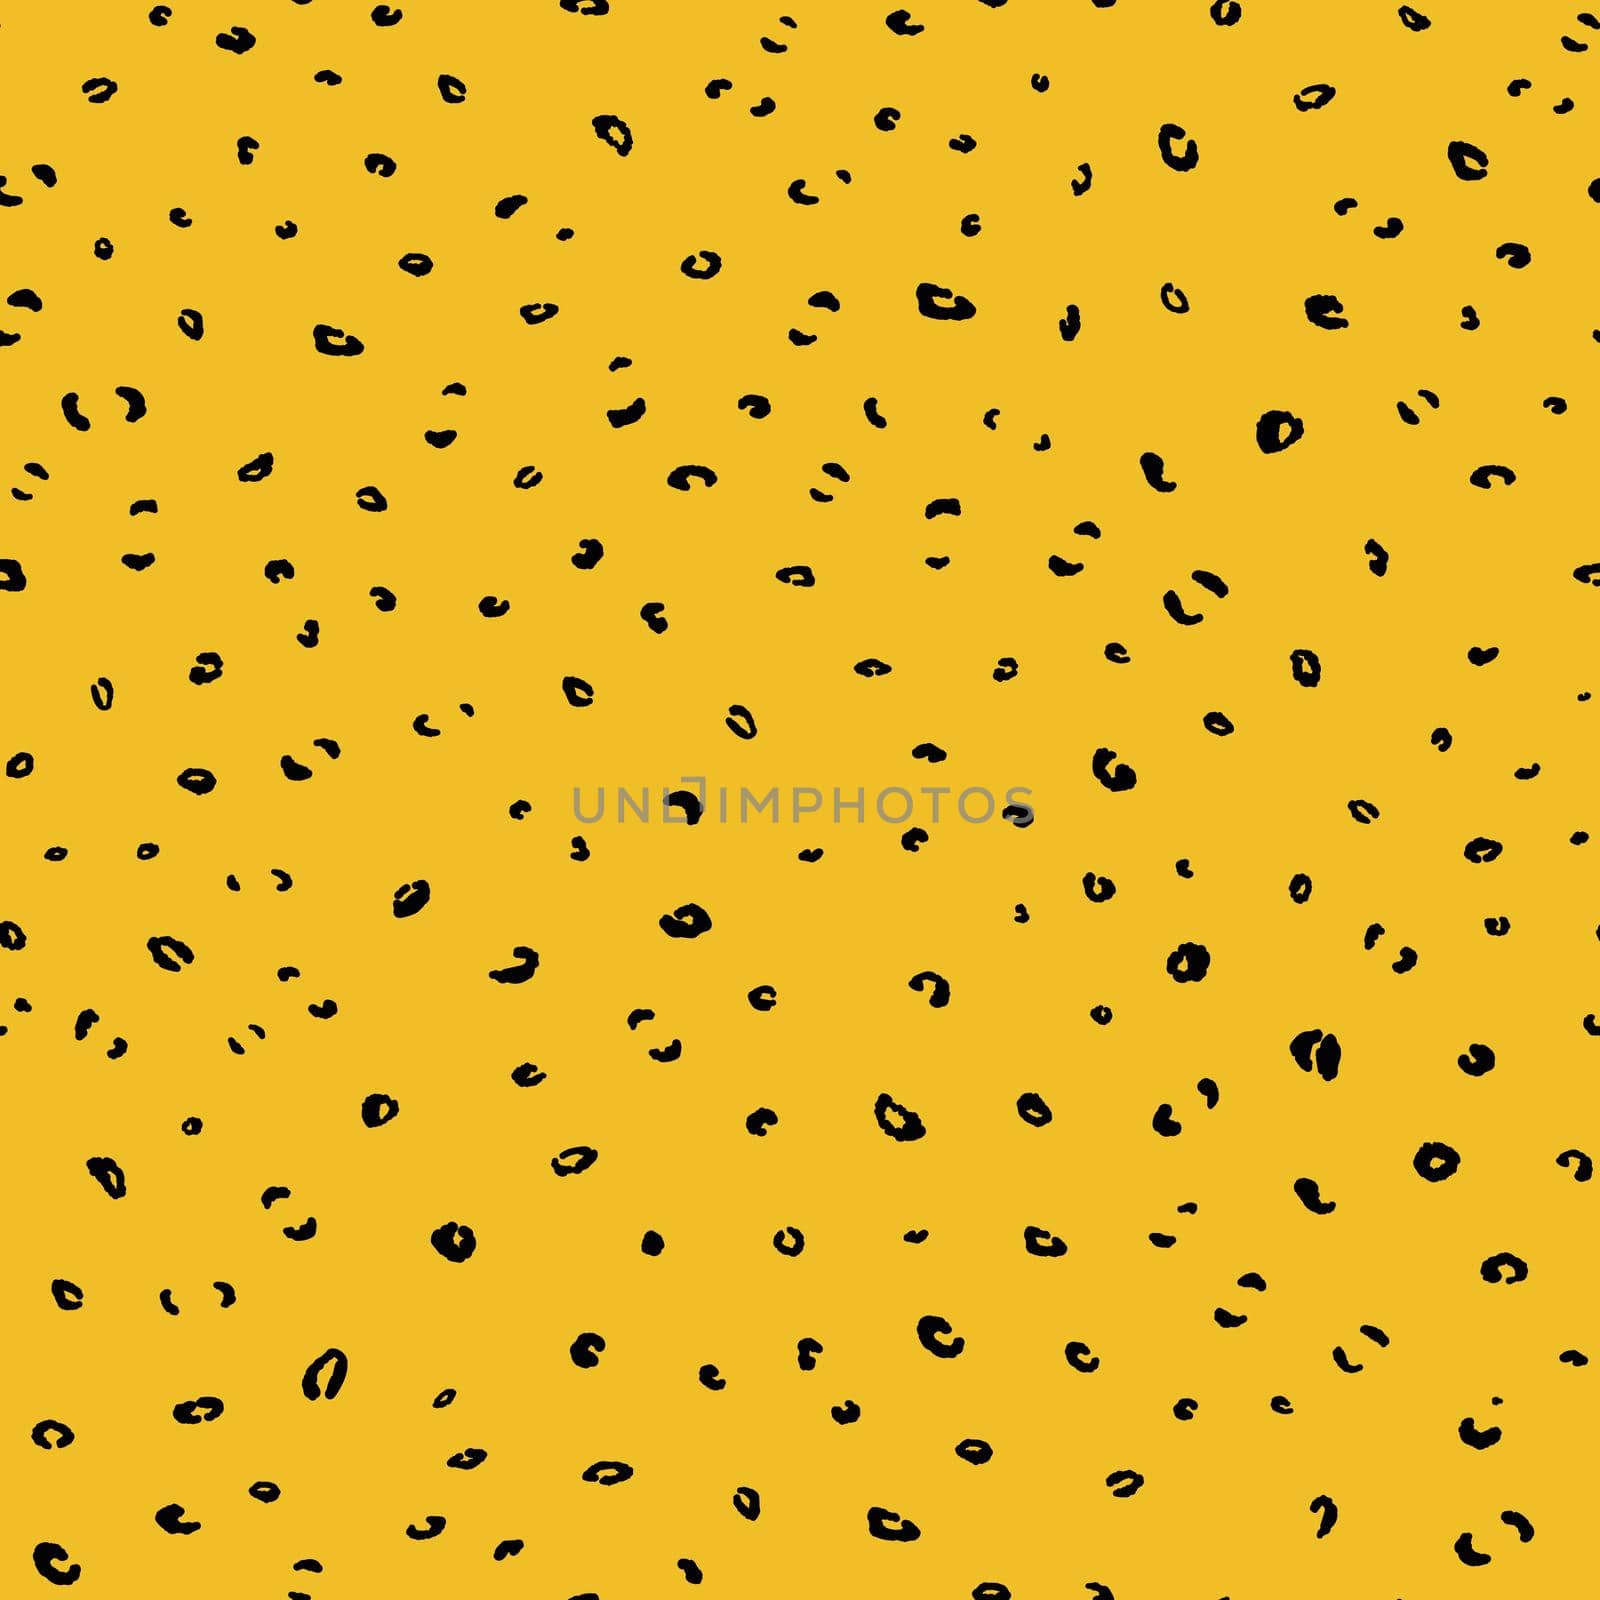 Abstract modern leopard seamless pattern. Animals trendy background. Yellow and black decorative vector stock illustration for print, card, postcard, fabric, textile. Modern ornament of stylized skin.